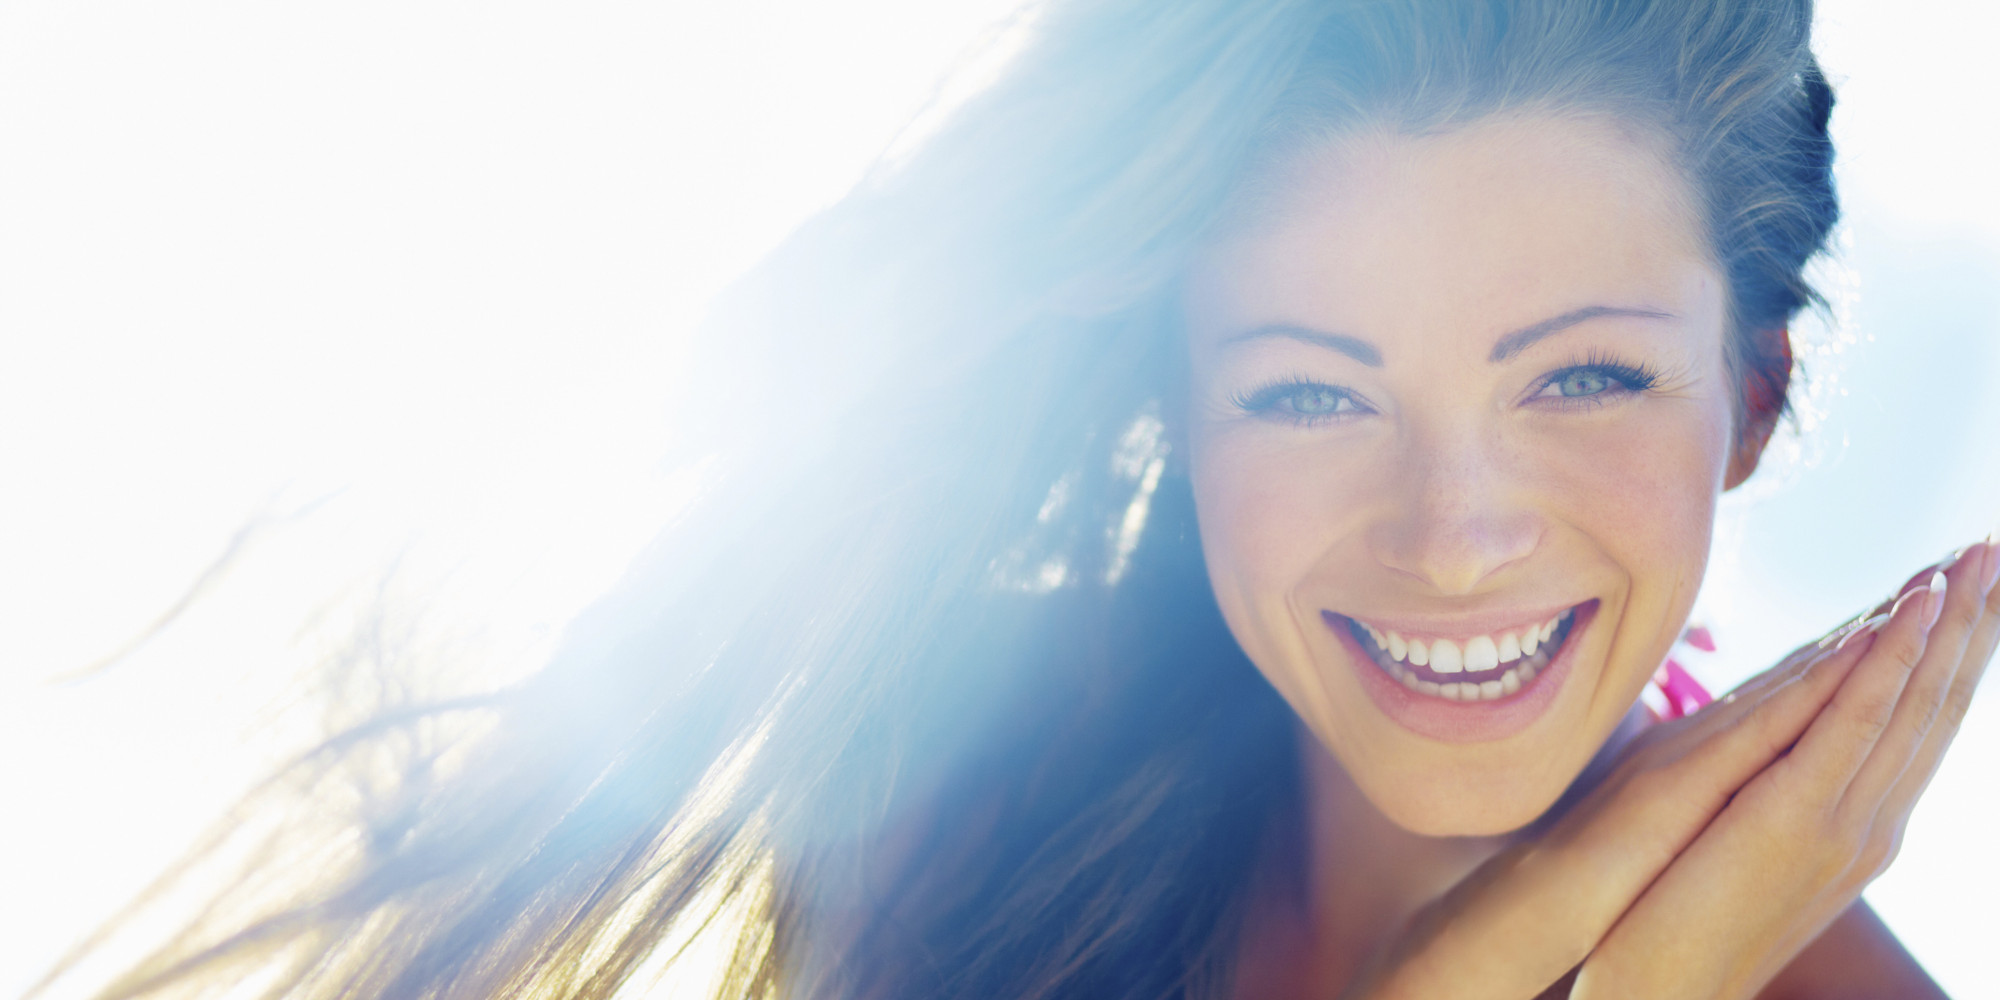 LXP - Lifexpe - Closeup of a beautiful smiling young woman 29 Exciting Reasons Why Life is Great